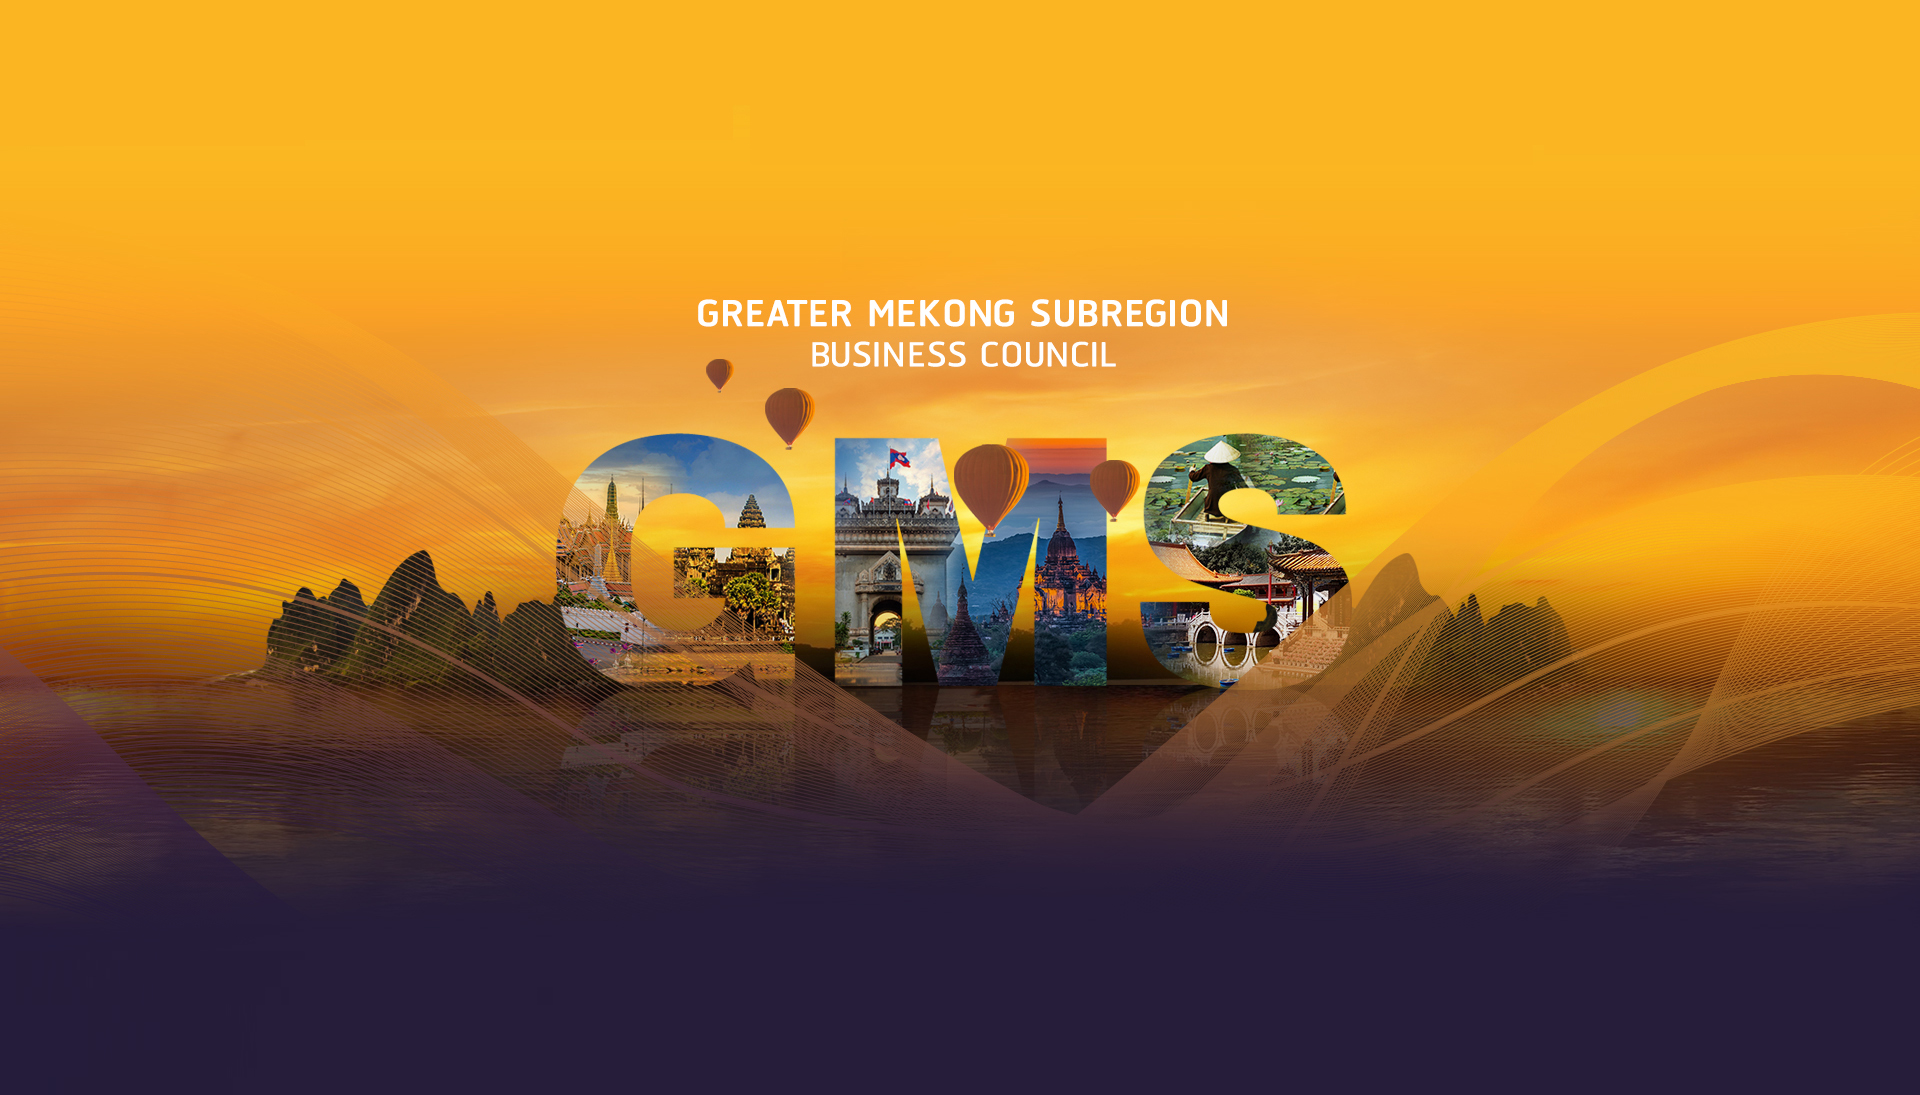 Greater Mekong Subregion Business Council